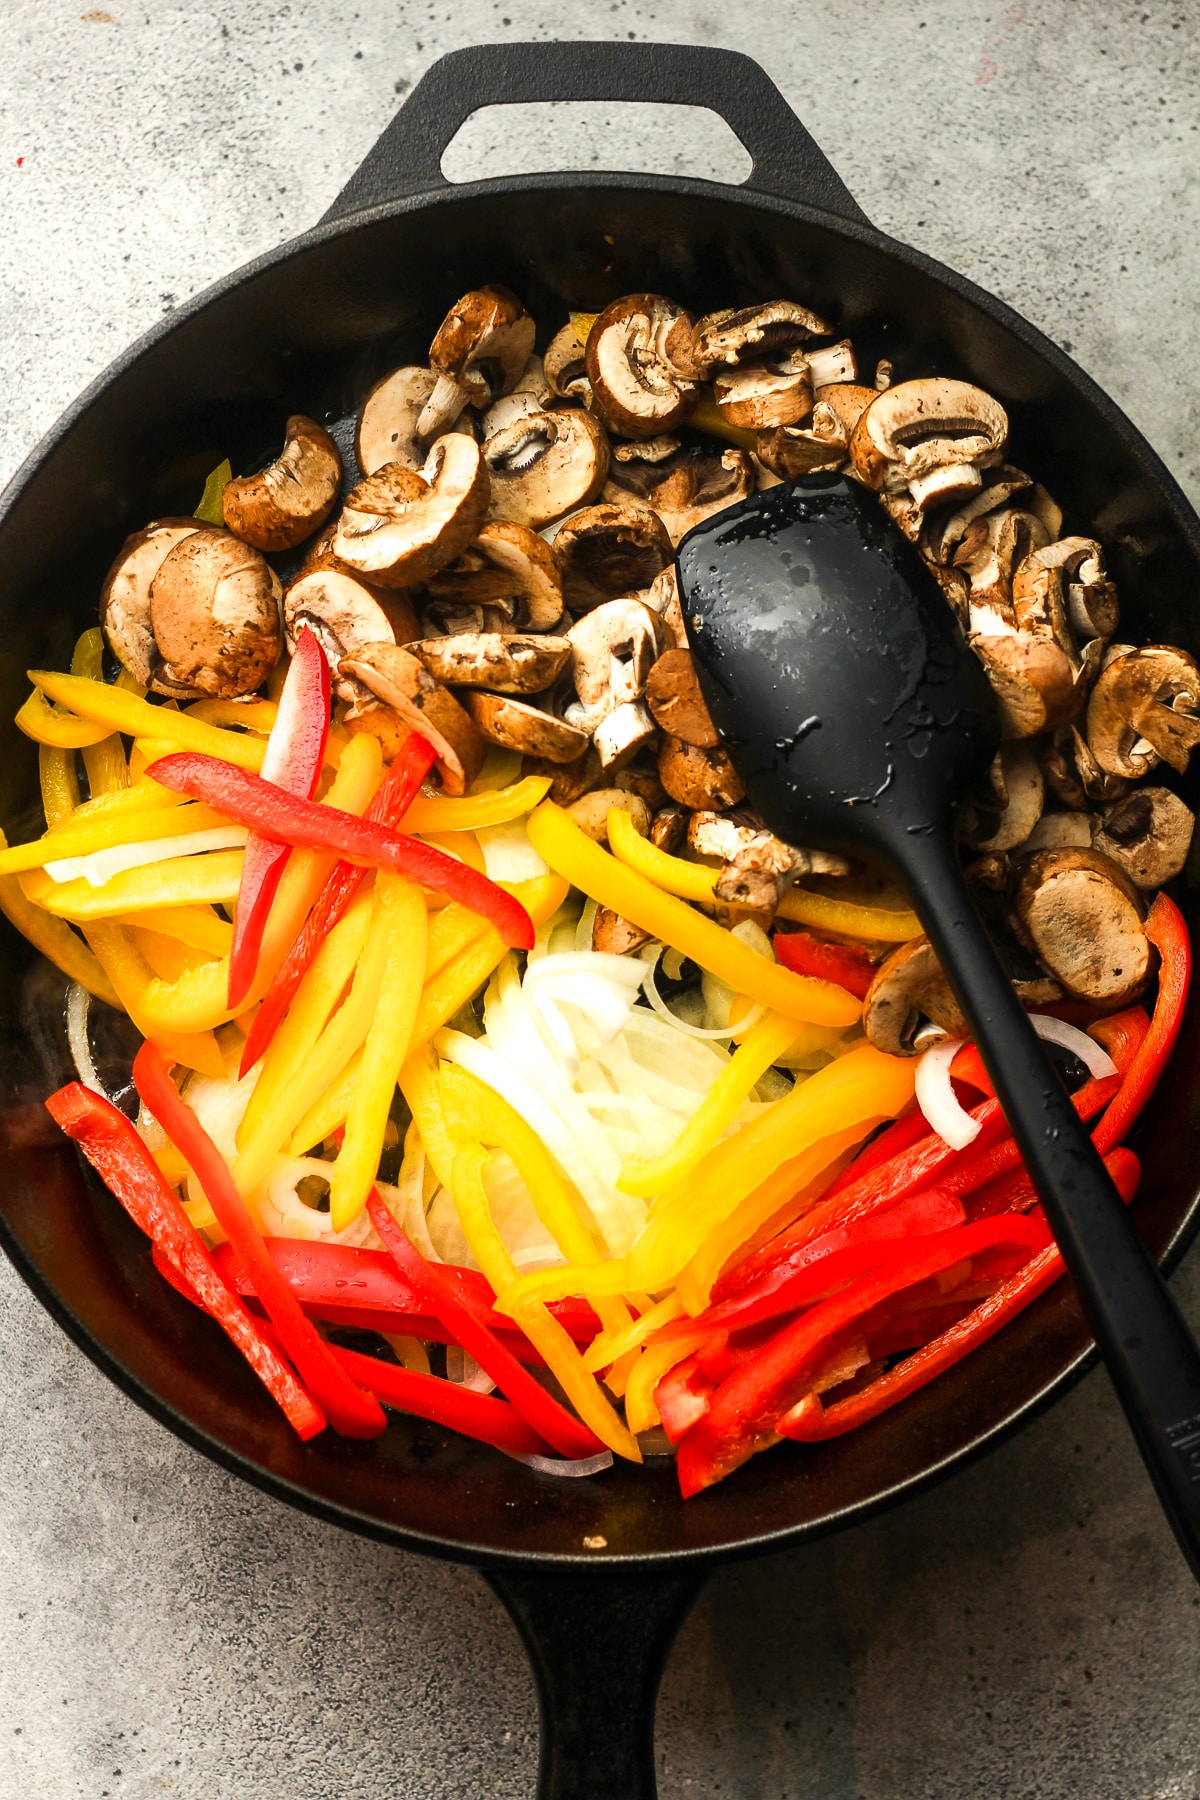 A skillet of the veggies.